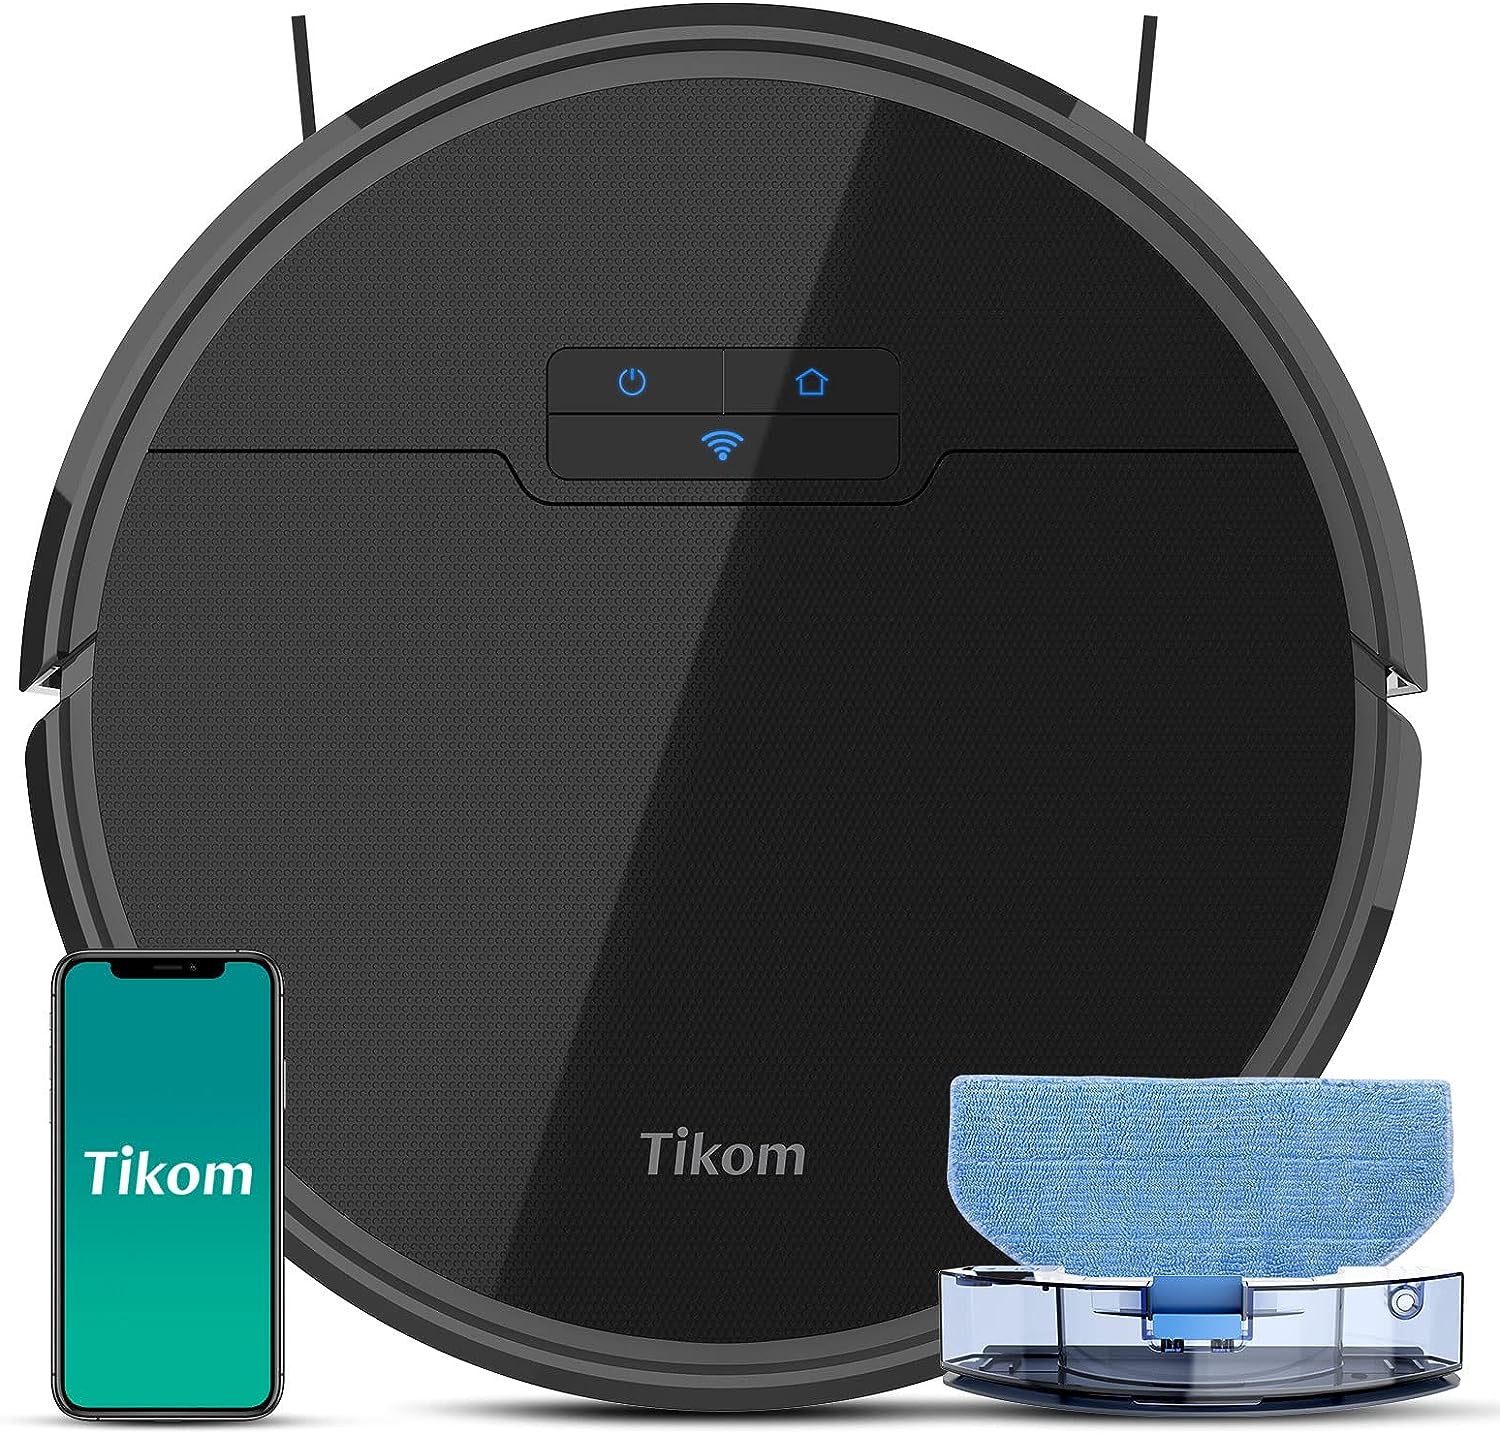 Tikom Robot Vacuum and Mop, G8000 Robot Vacuum Cleaner, 2700Pa Strong Suction